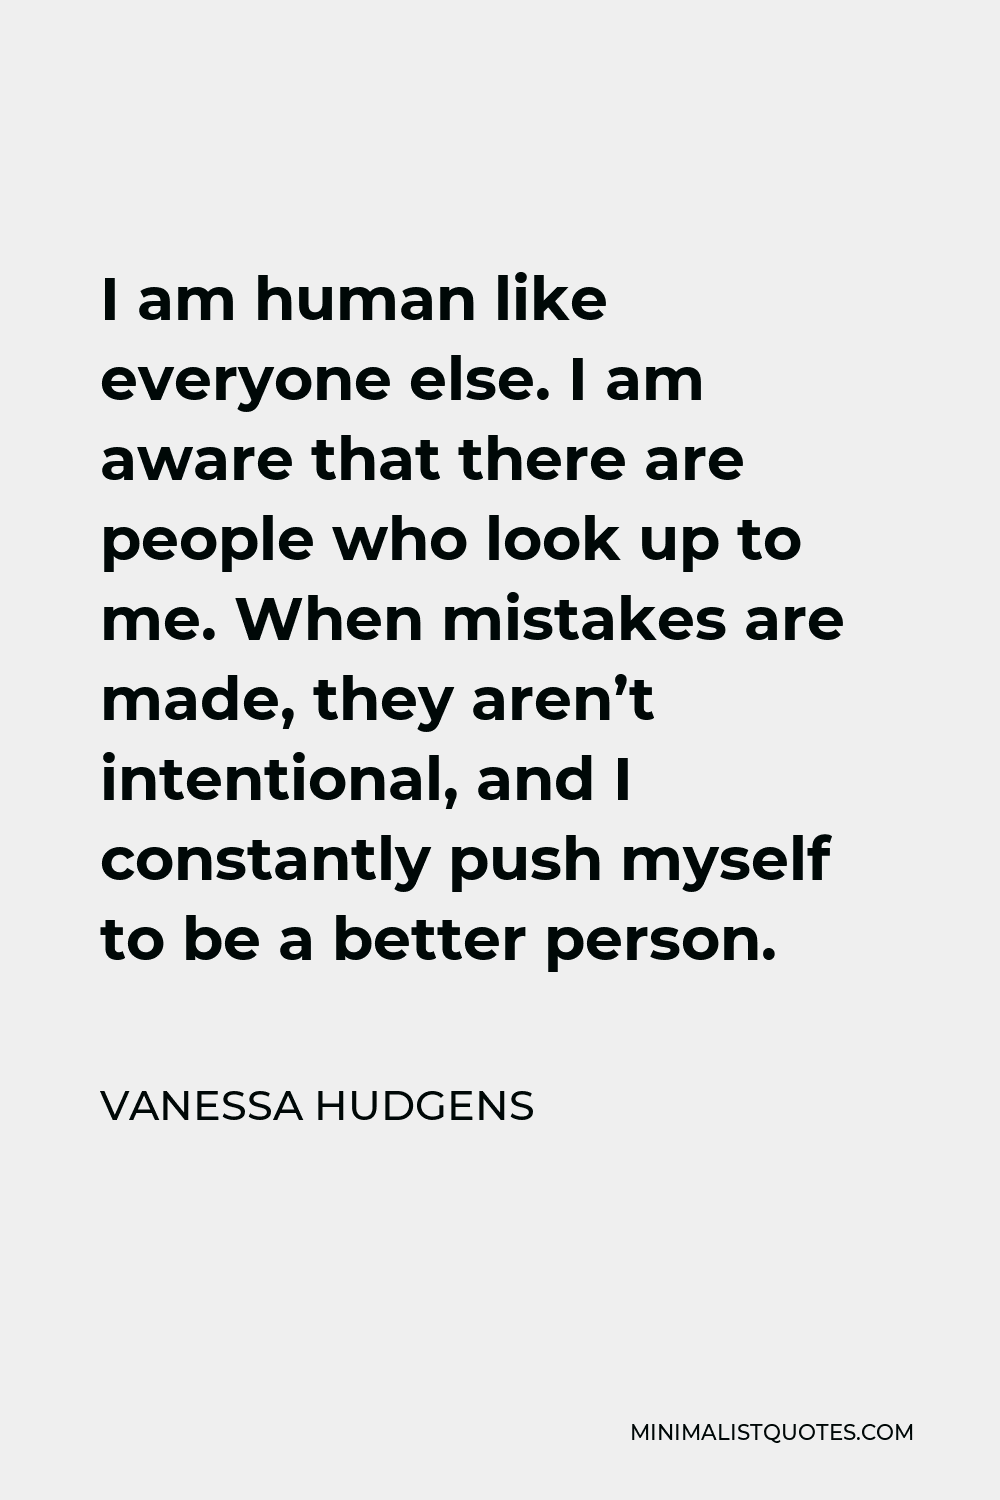 Vanessa Hudgens Quote - I am human like everyone else. I am aware that there are people who look up to me. When mistakes are made, they aren’t intentional, and I constantly push myself to be a better person.